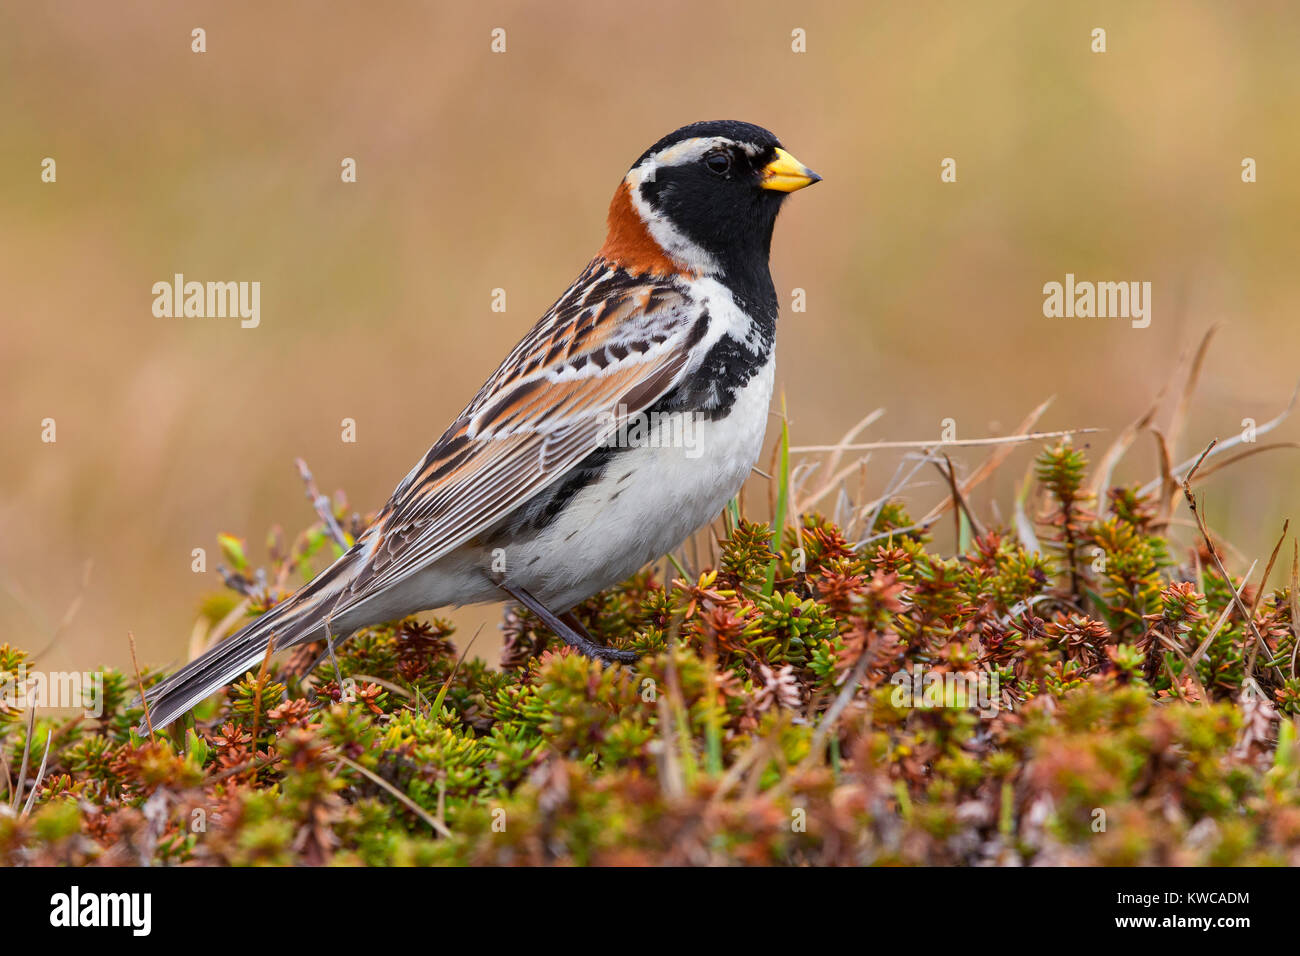 Lapland Longspur (Calcarius lapponicus), adult male standing on the ground Stock Photo